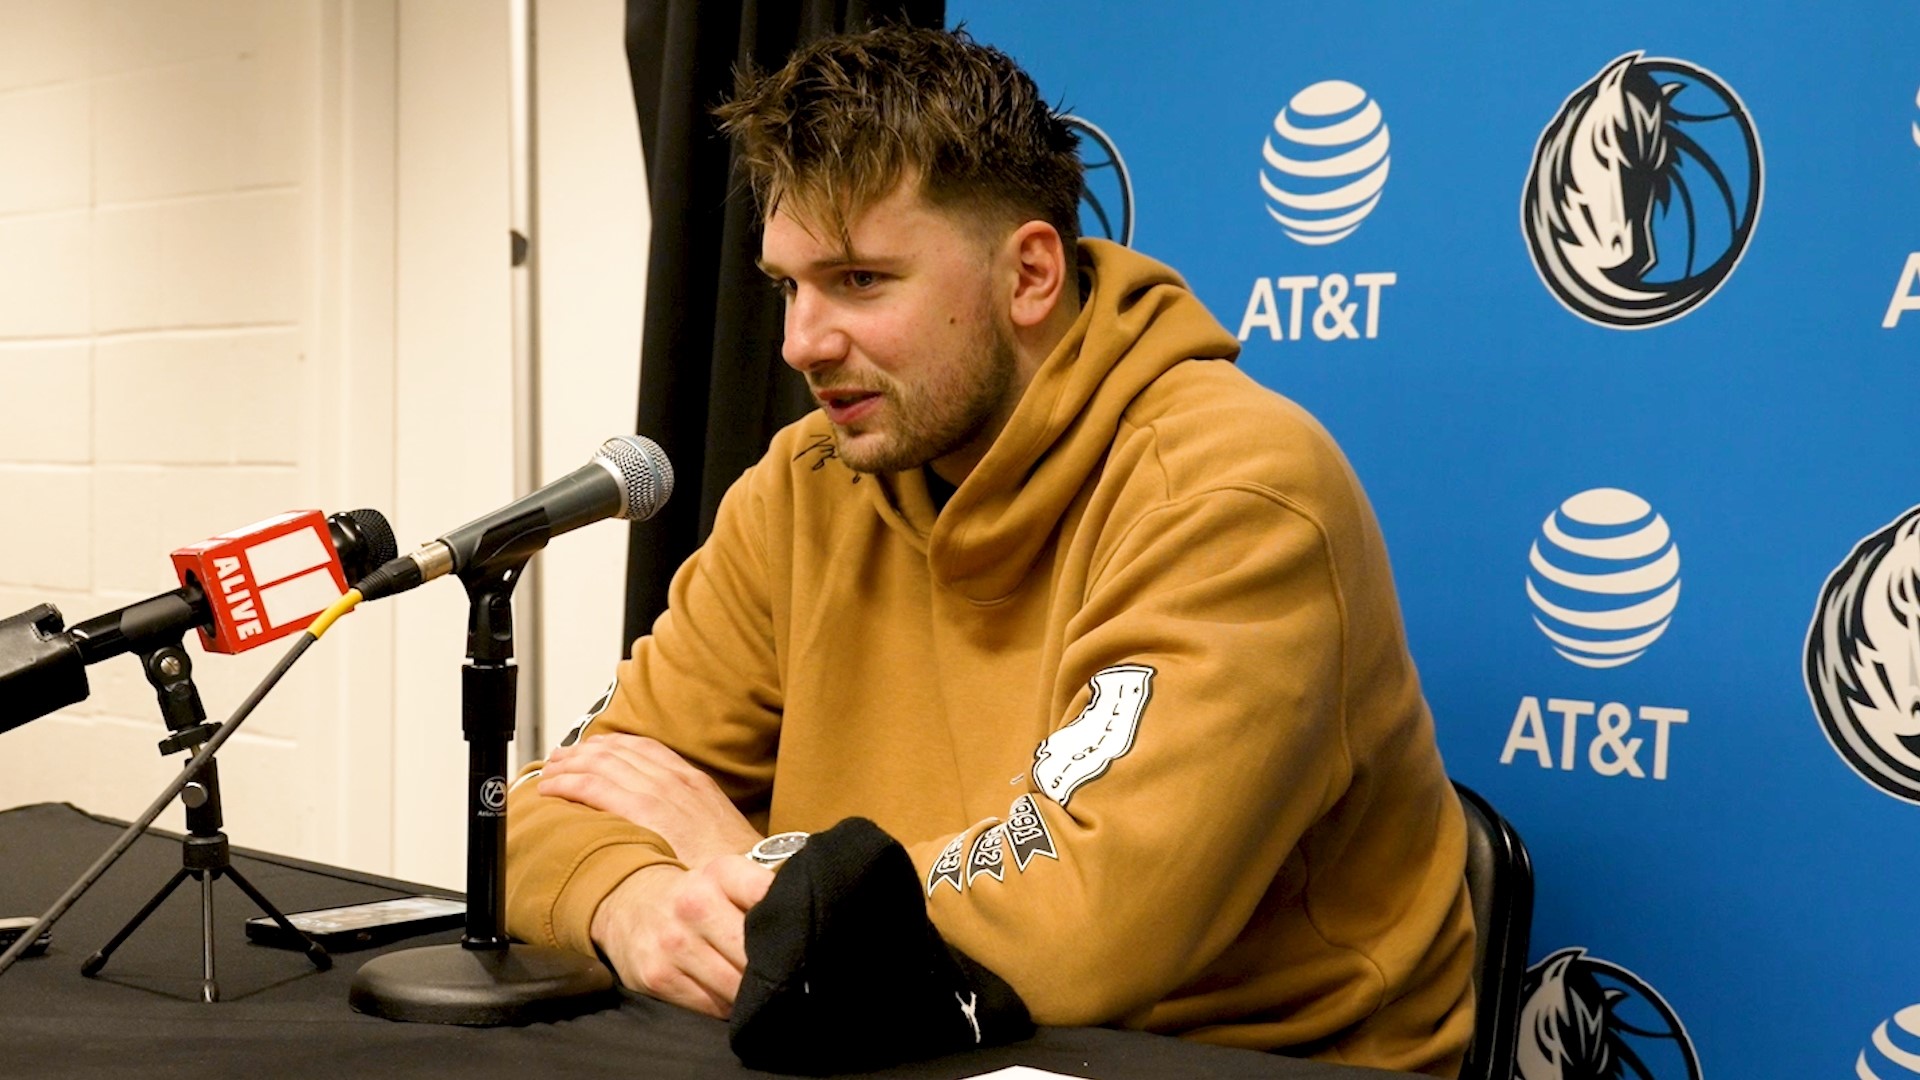 The Mavericks' previous high mark for points in a half was 34 by Dirk Nowitzki on Nov. 3, 2009. Here's Luka Doncic talking to the media after the game.